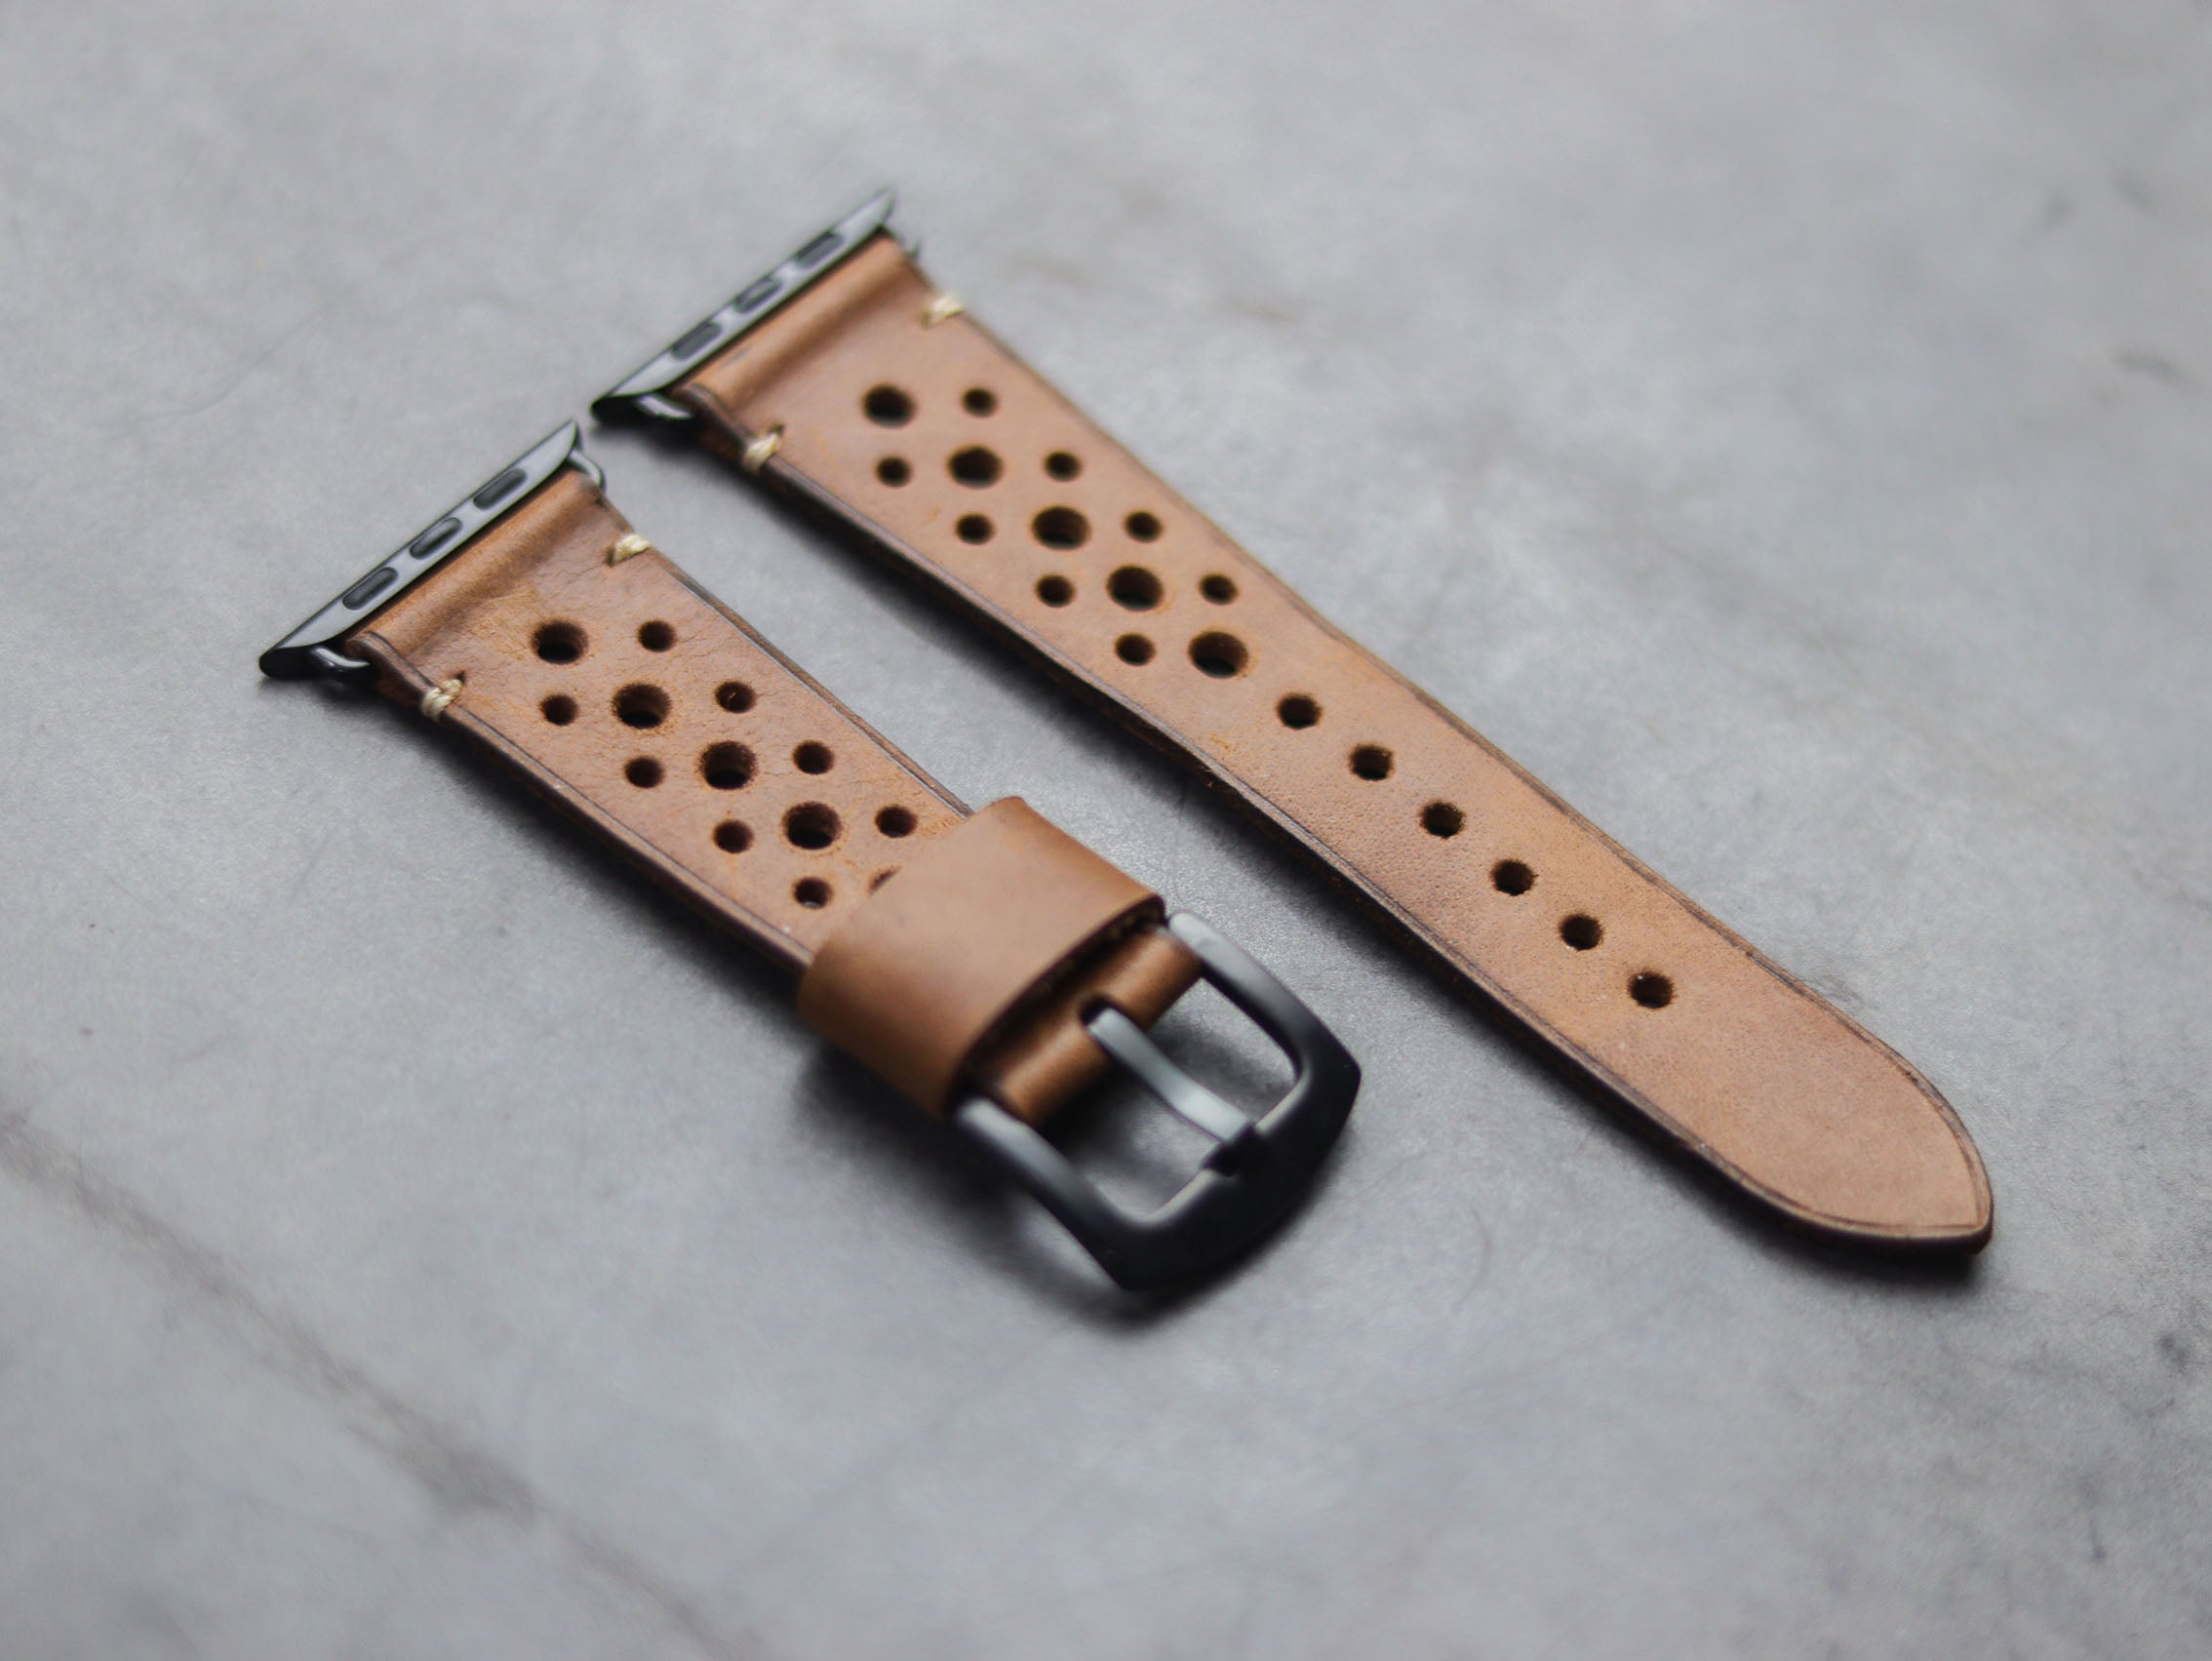 CARAMEL BROWN RALLY HAND-CRAFTED APPLE WATCH STRAPS